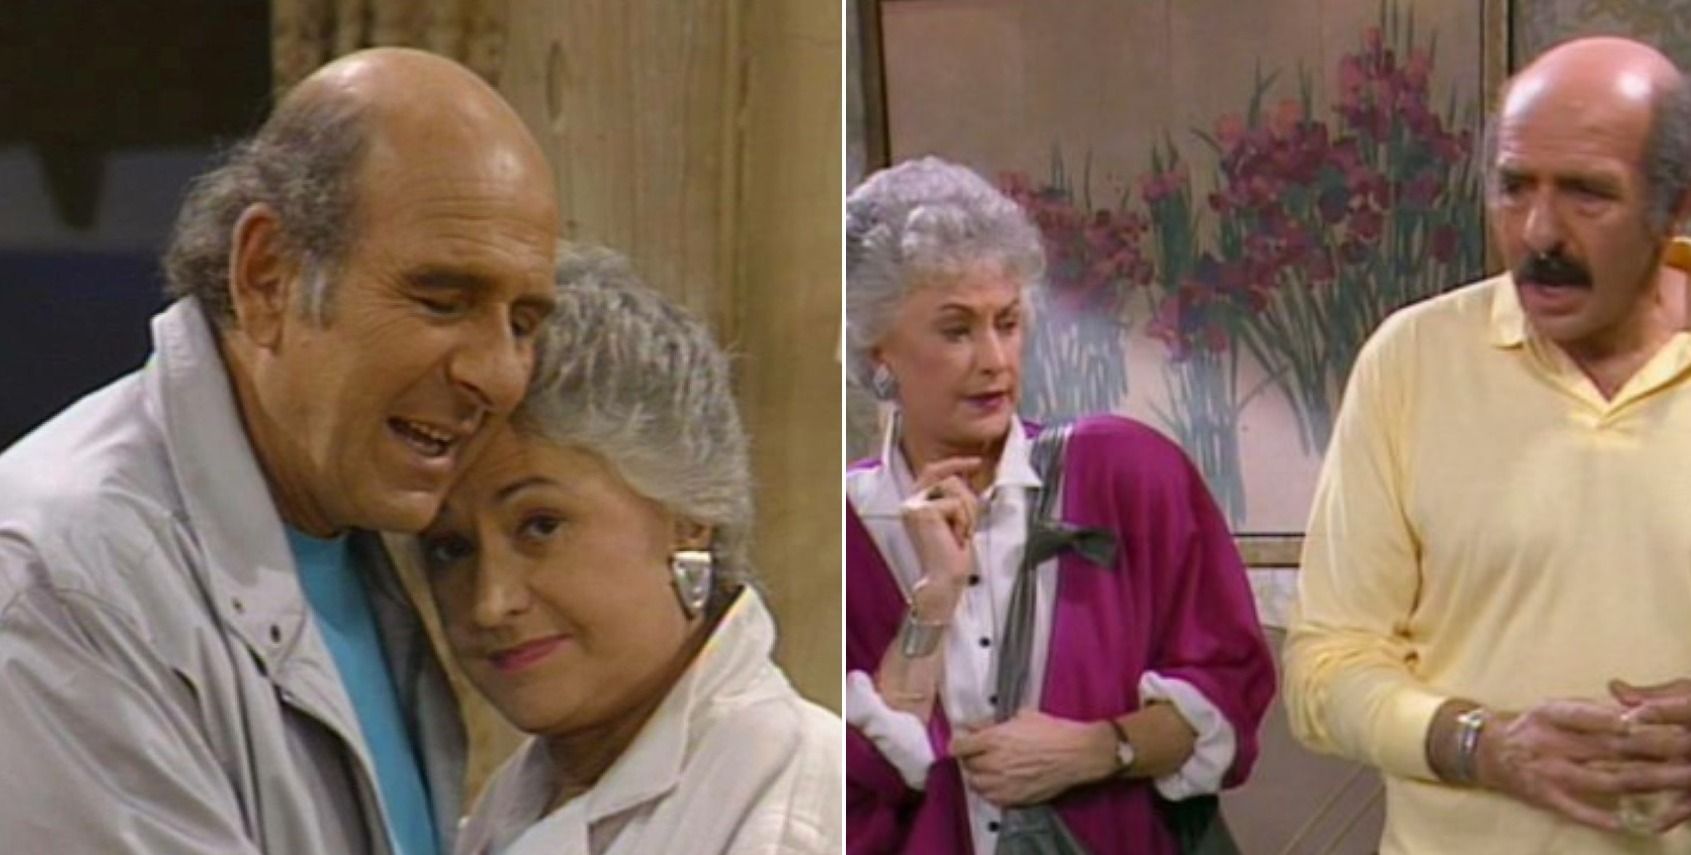 Dorothy (Bea Arthur) and Stan (Herb Edelman) in &quot;The Golden Girls.&quot;